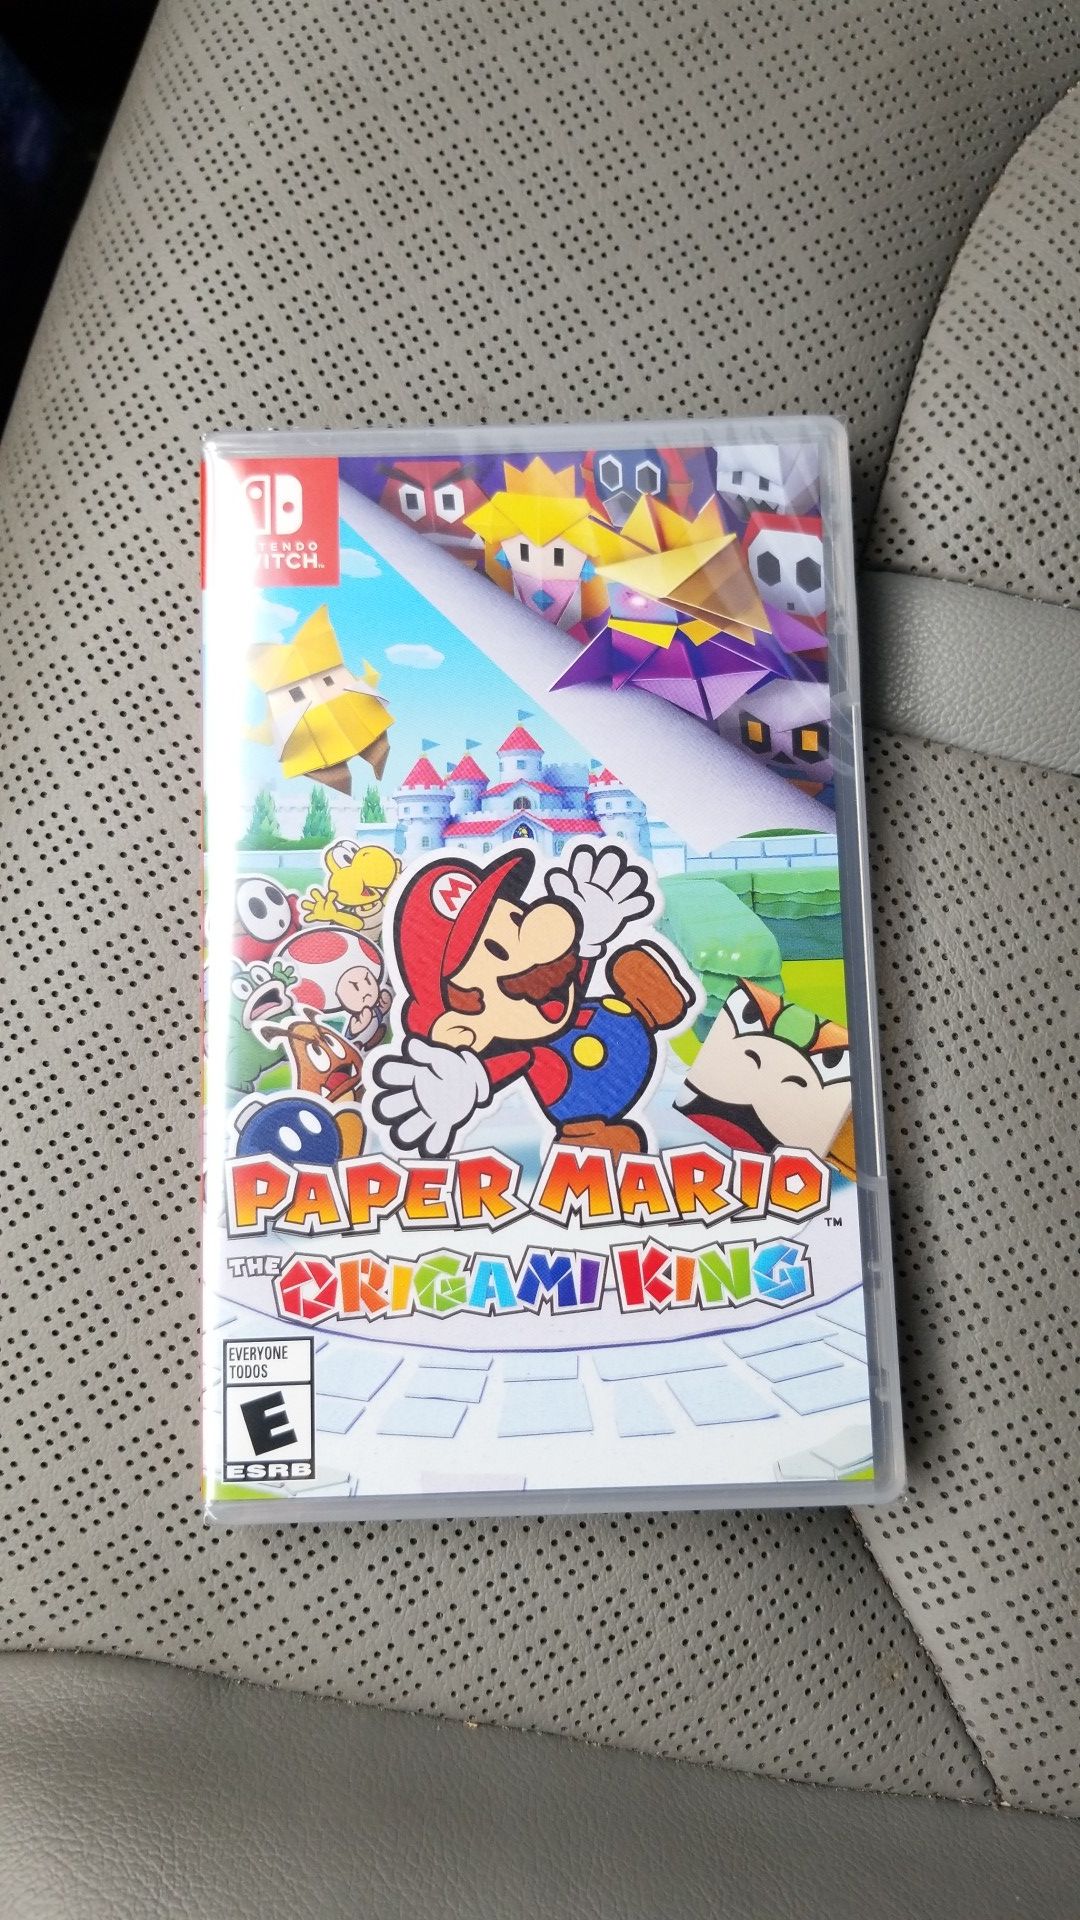 Paper Mario Origami King (brand new)